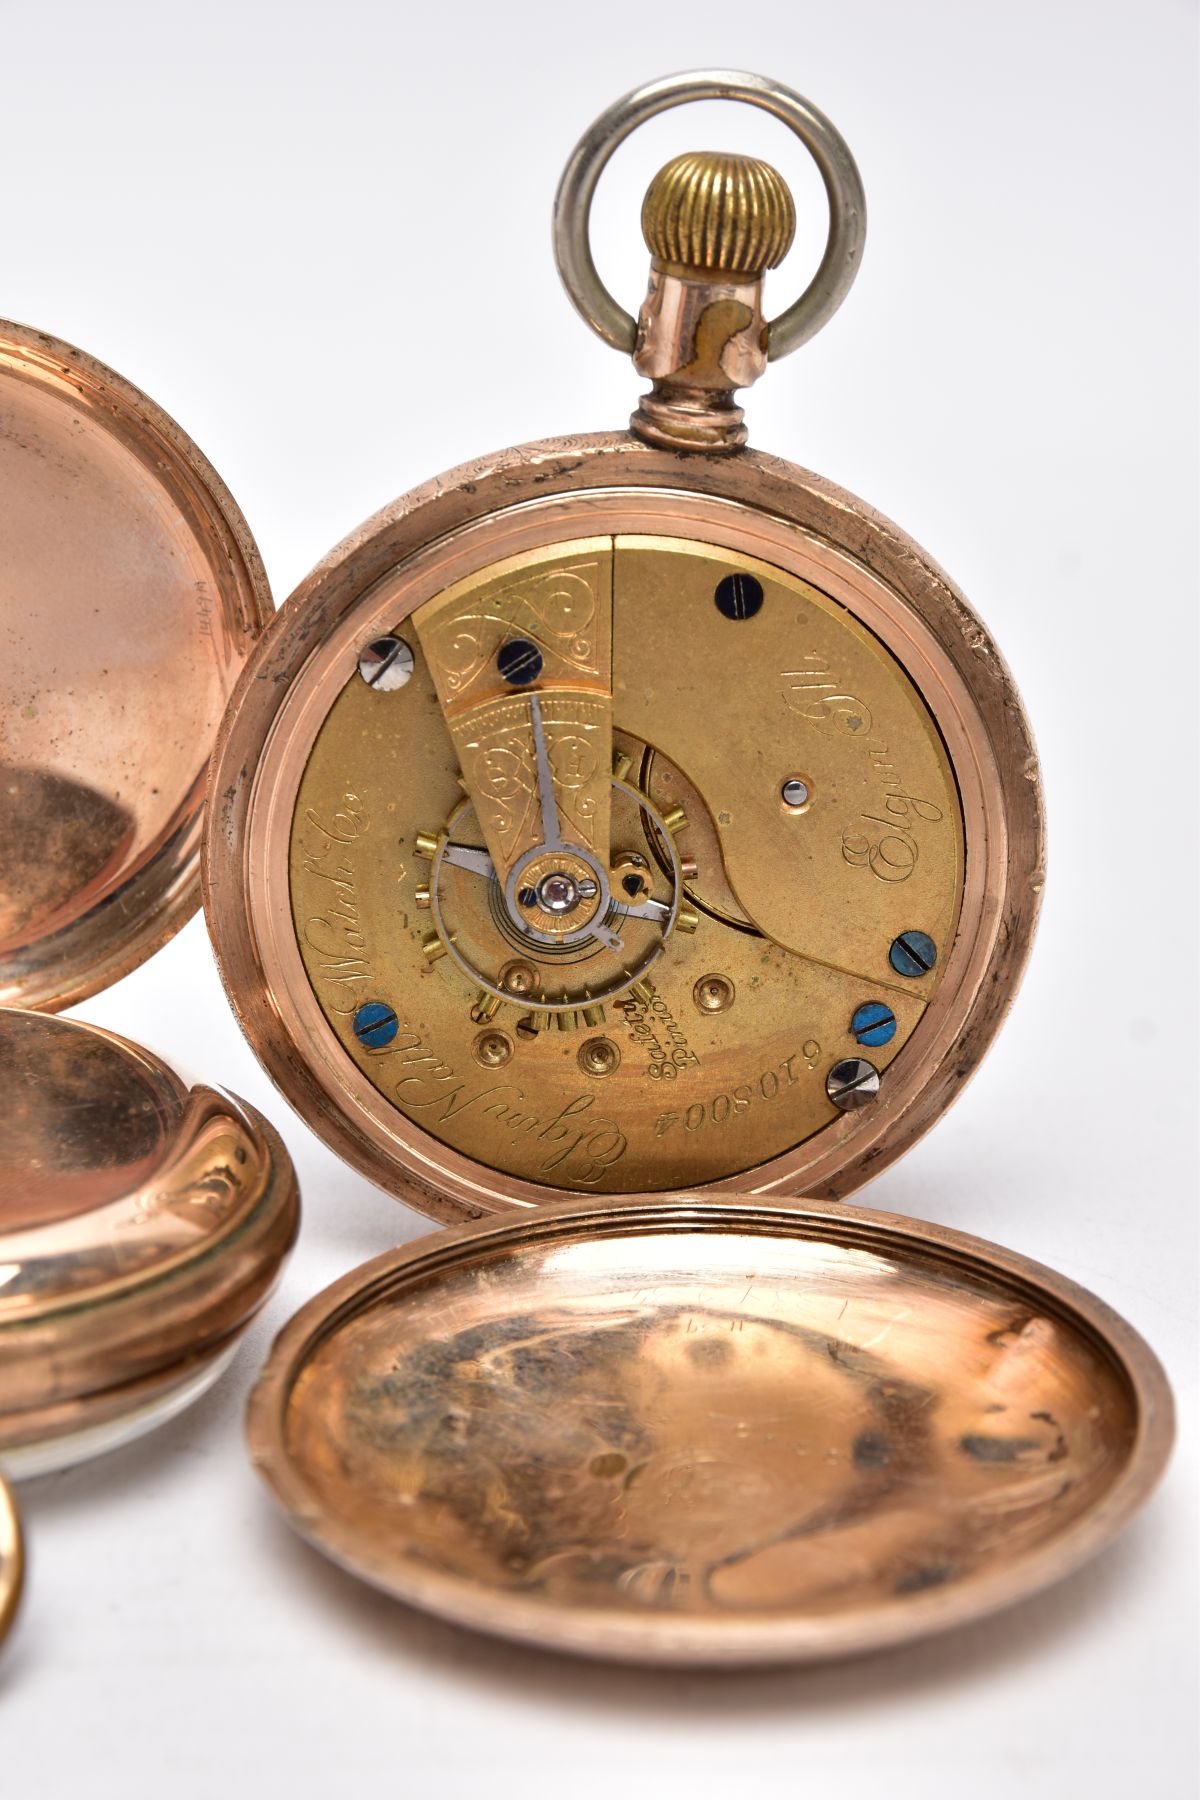 THREE GOLD PLATED OPEN FACED POCKET WATCHES, the first with a white dial signed 'Eros', Arabic - Image 4 of 8